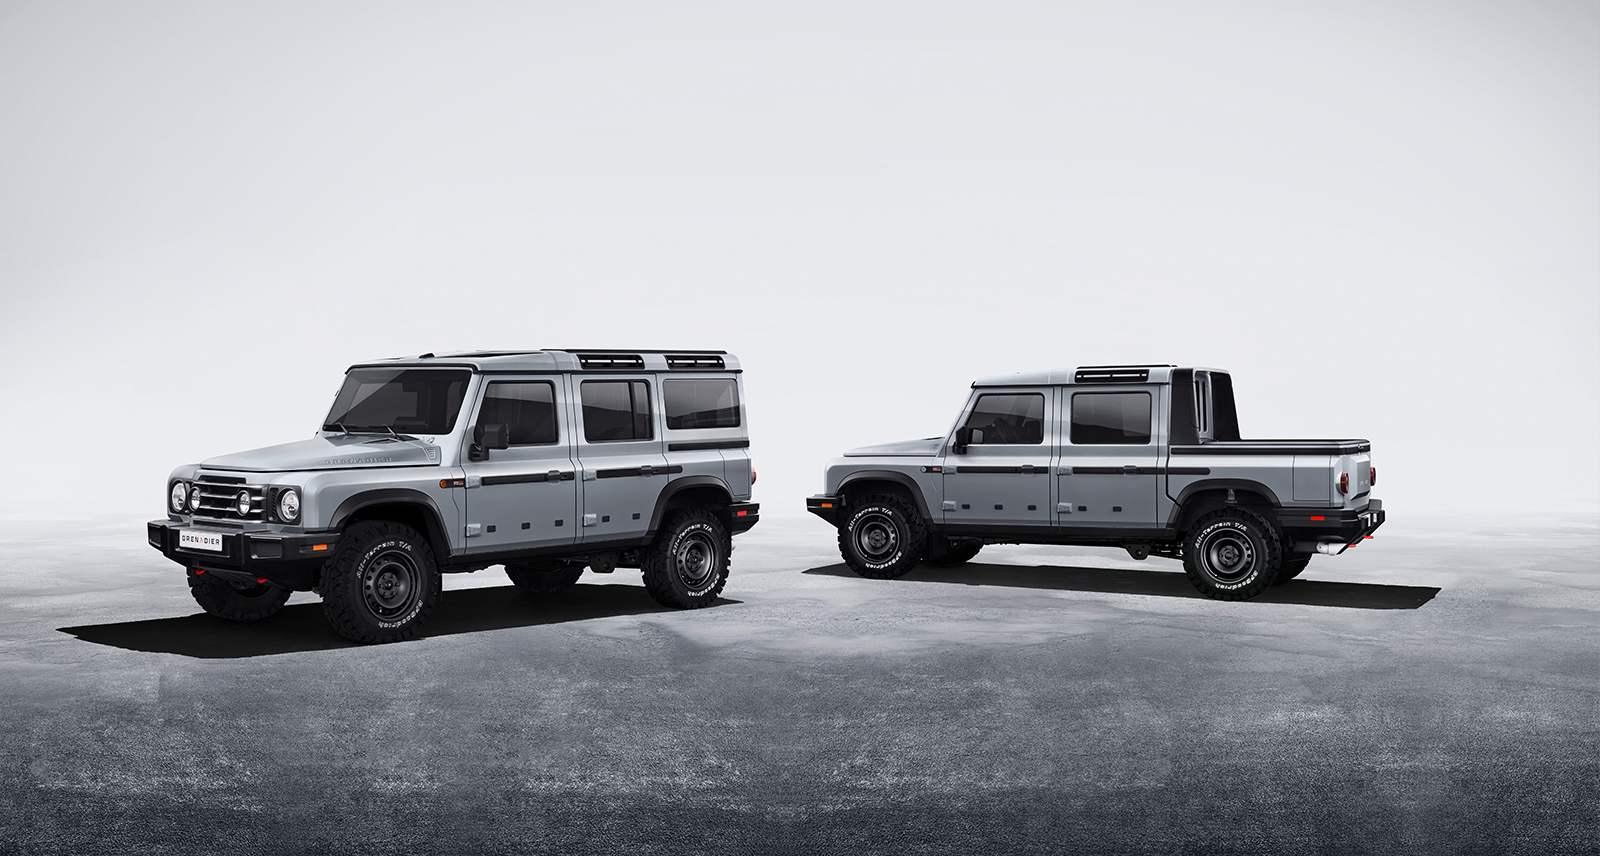 INEOS Automotive reveals the design of its upcoming 4x4 the Grenadier